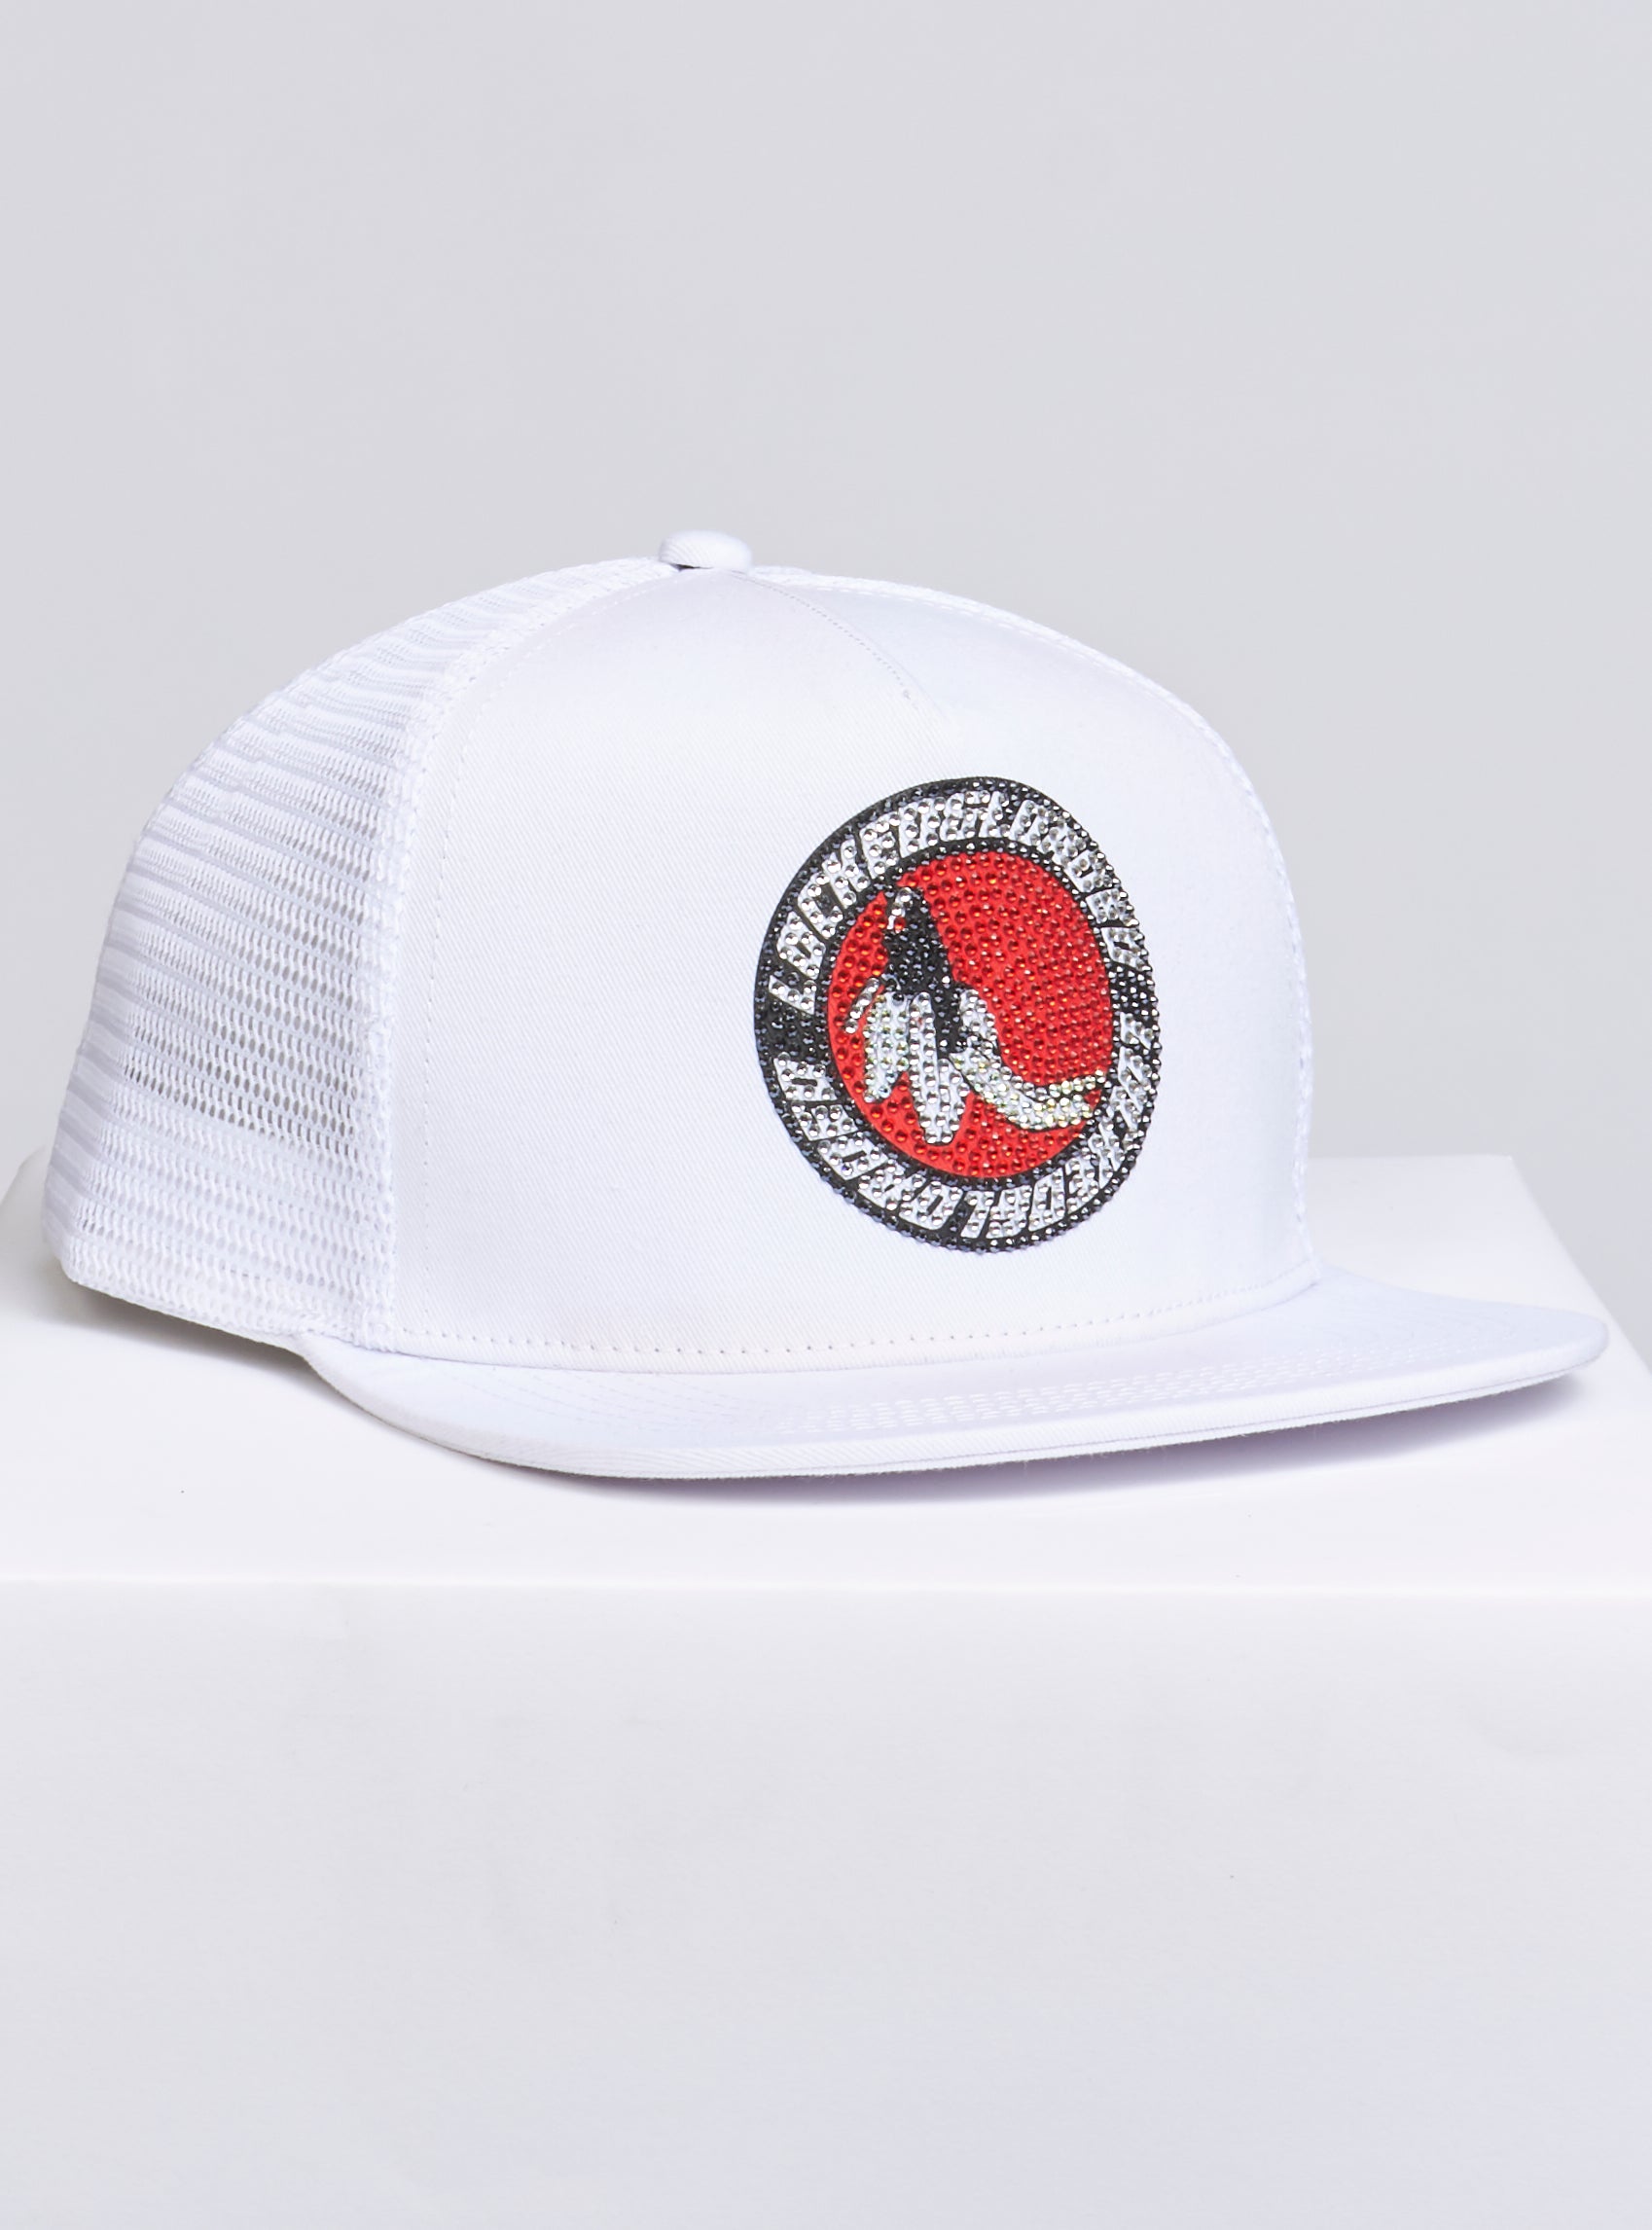 Locked & Loaded Snapback - B. Clip - Black with Red on White - 103